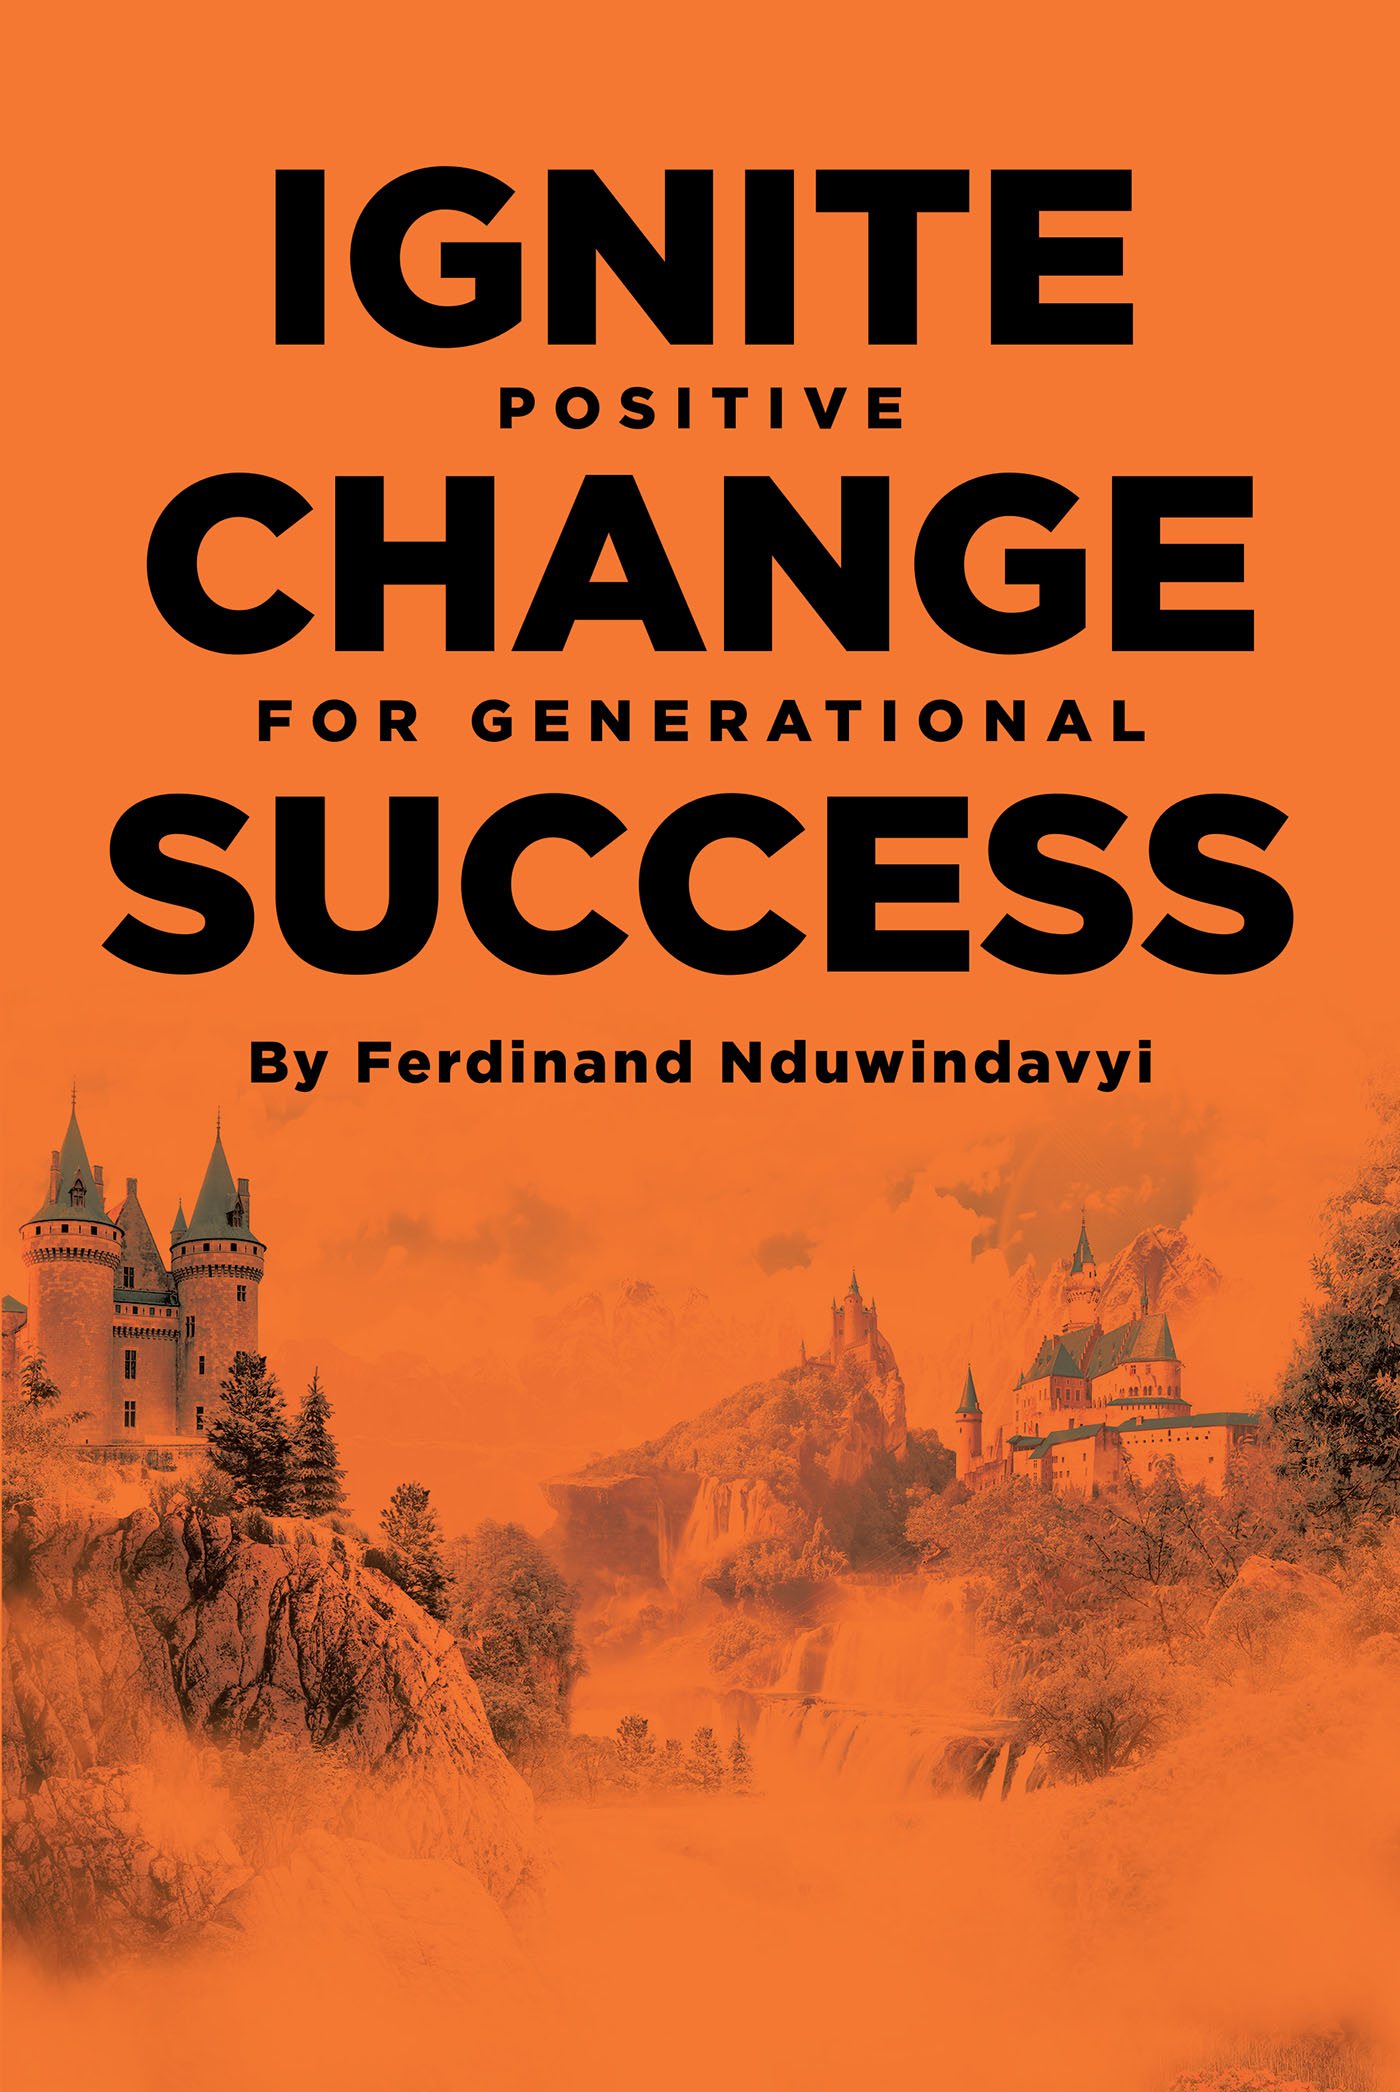 Ferdinand Nduwindavyi’s Newly Released "Ignite Positive Change for Generational Success" is an Inspiring Discussion of Aiding Future Successes